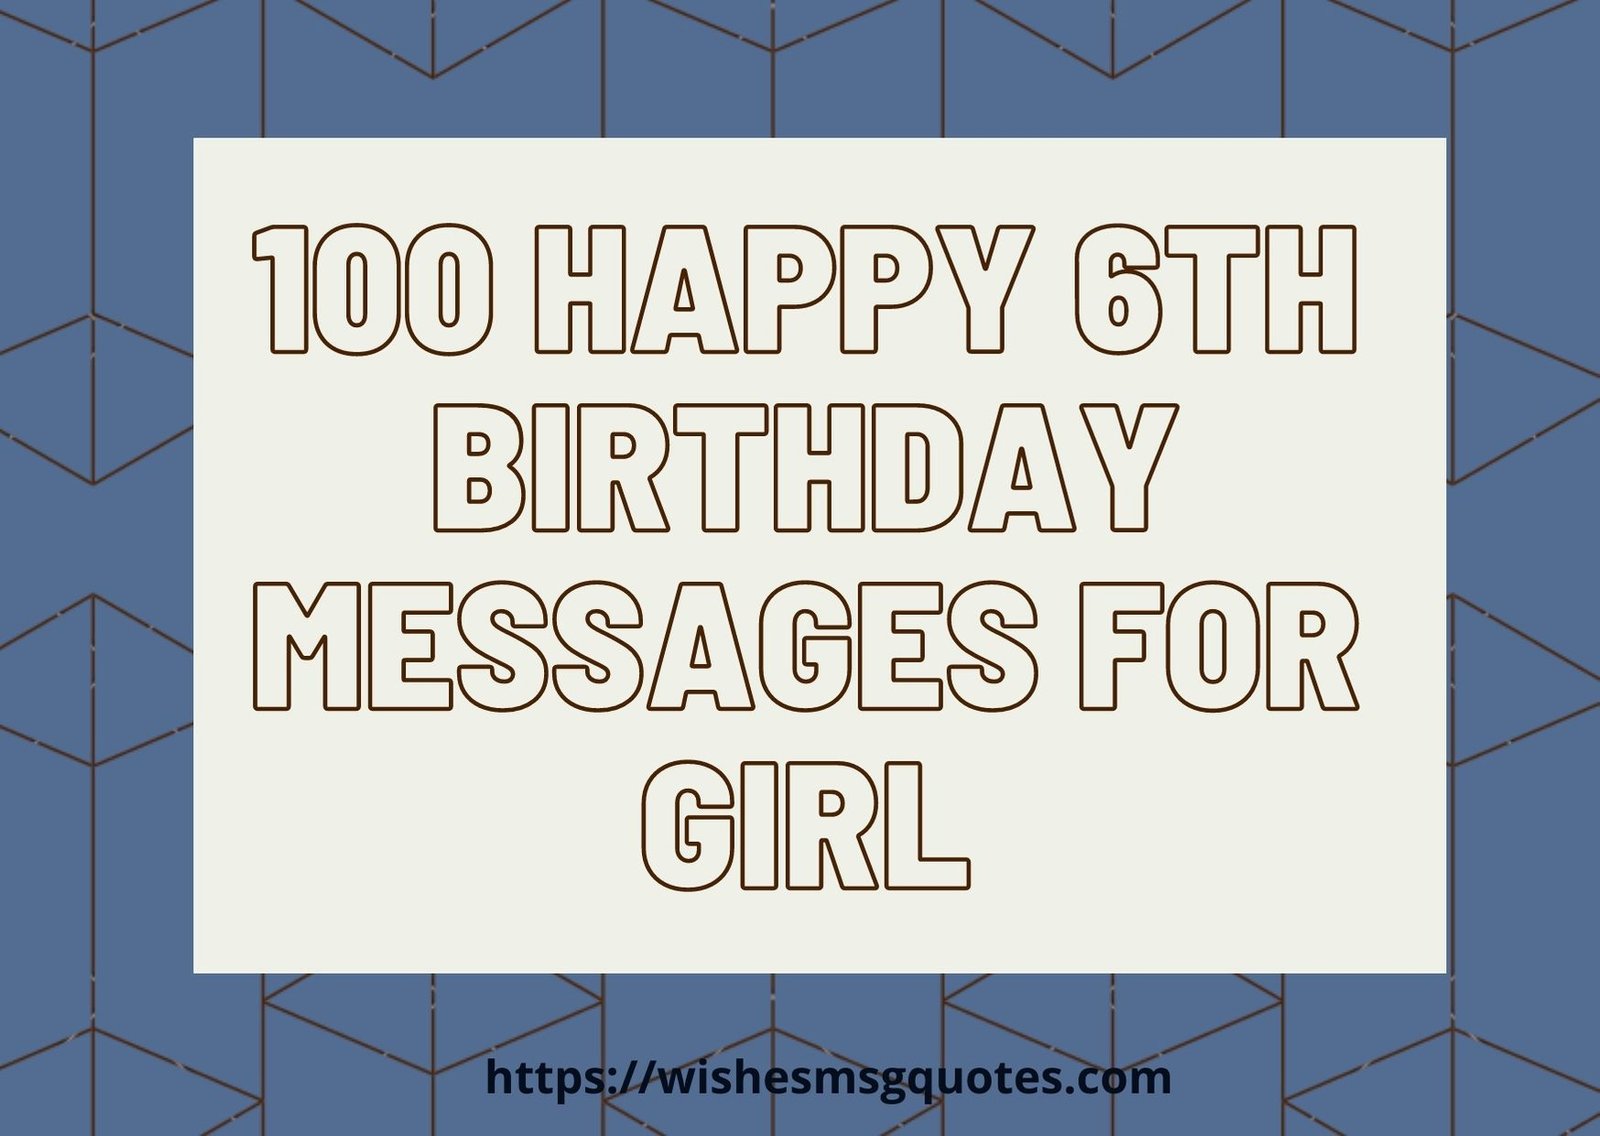 100 Happy 6th Birthday Messages For Girl